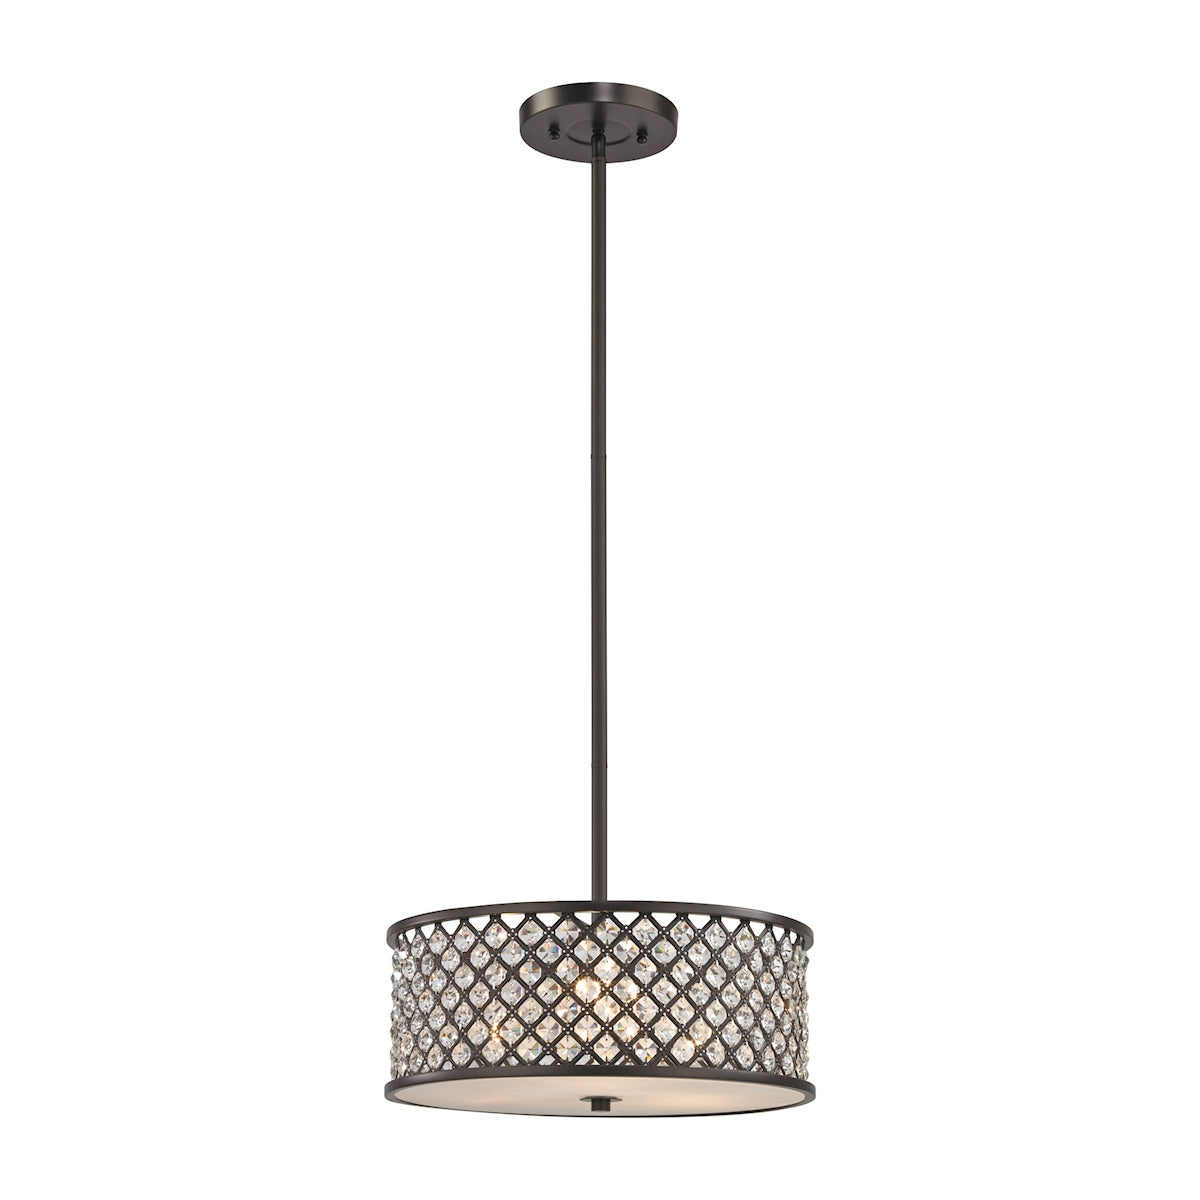 ELK Lighting 32104/3 Genevieve 3-Light Chandelier in Oil Rubbed Bronze with Crystal and Mesh Shade